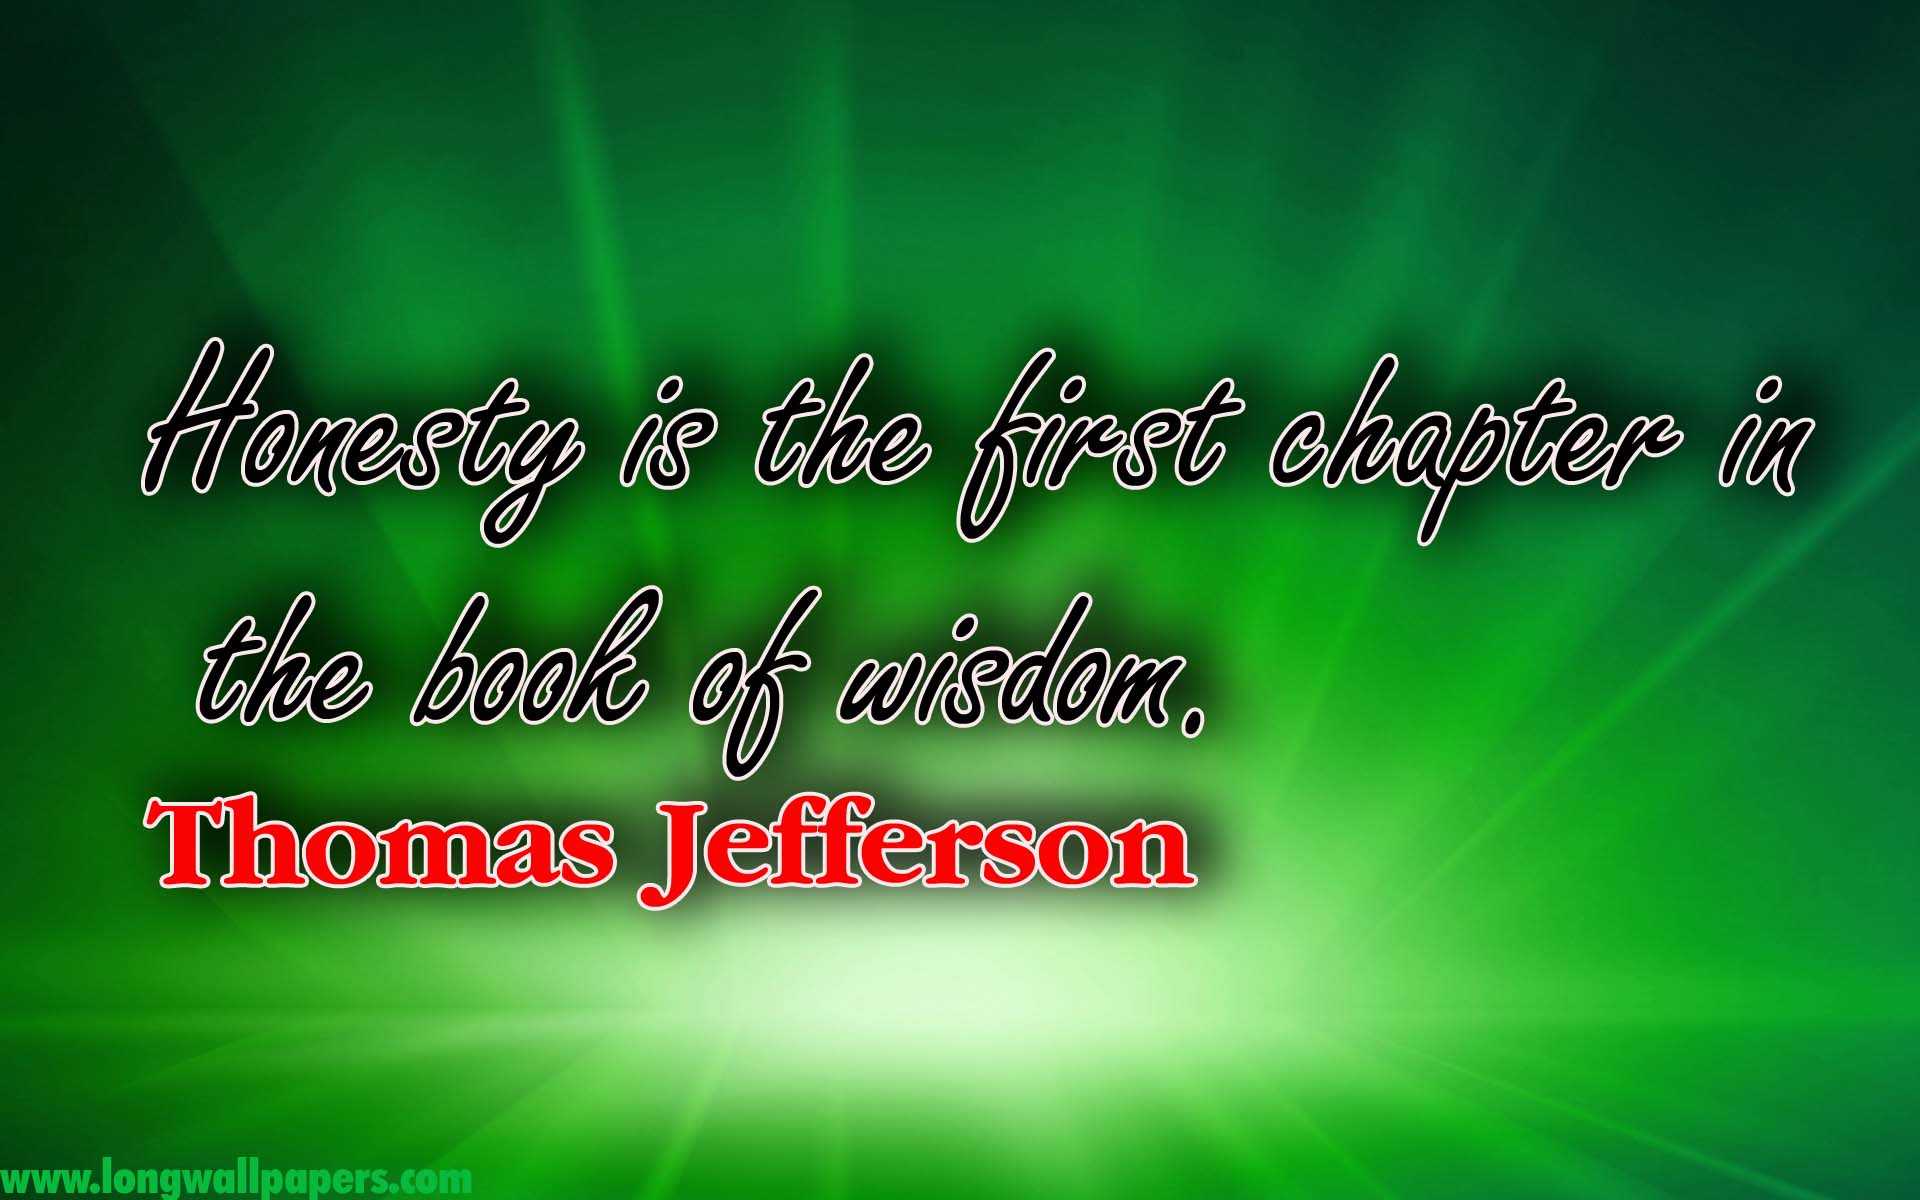 Thomas Jefferson Quotes About Honesty Wallpaper